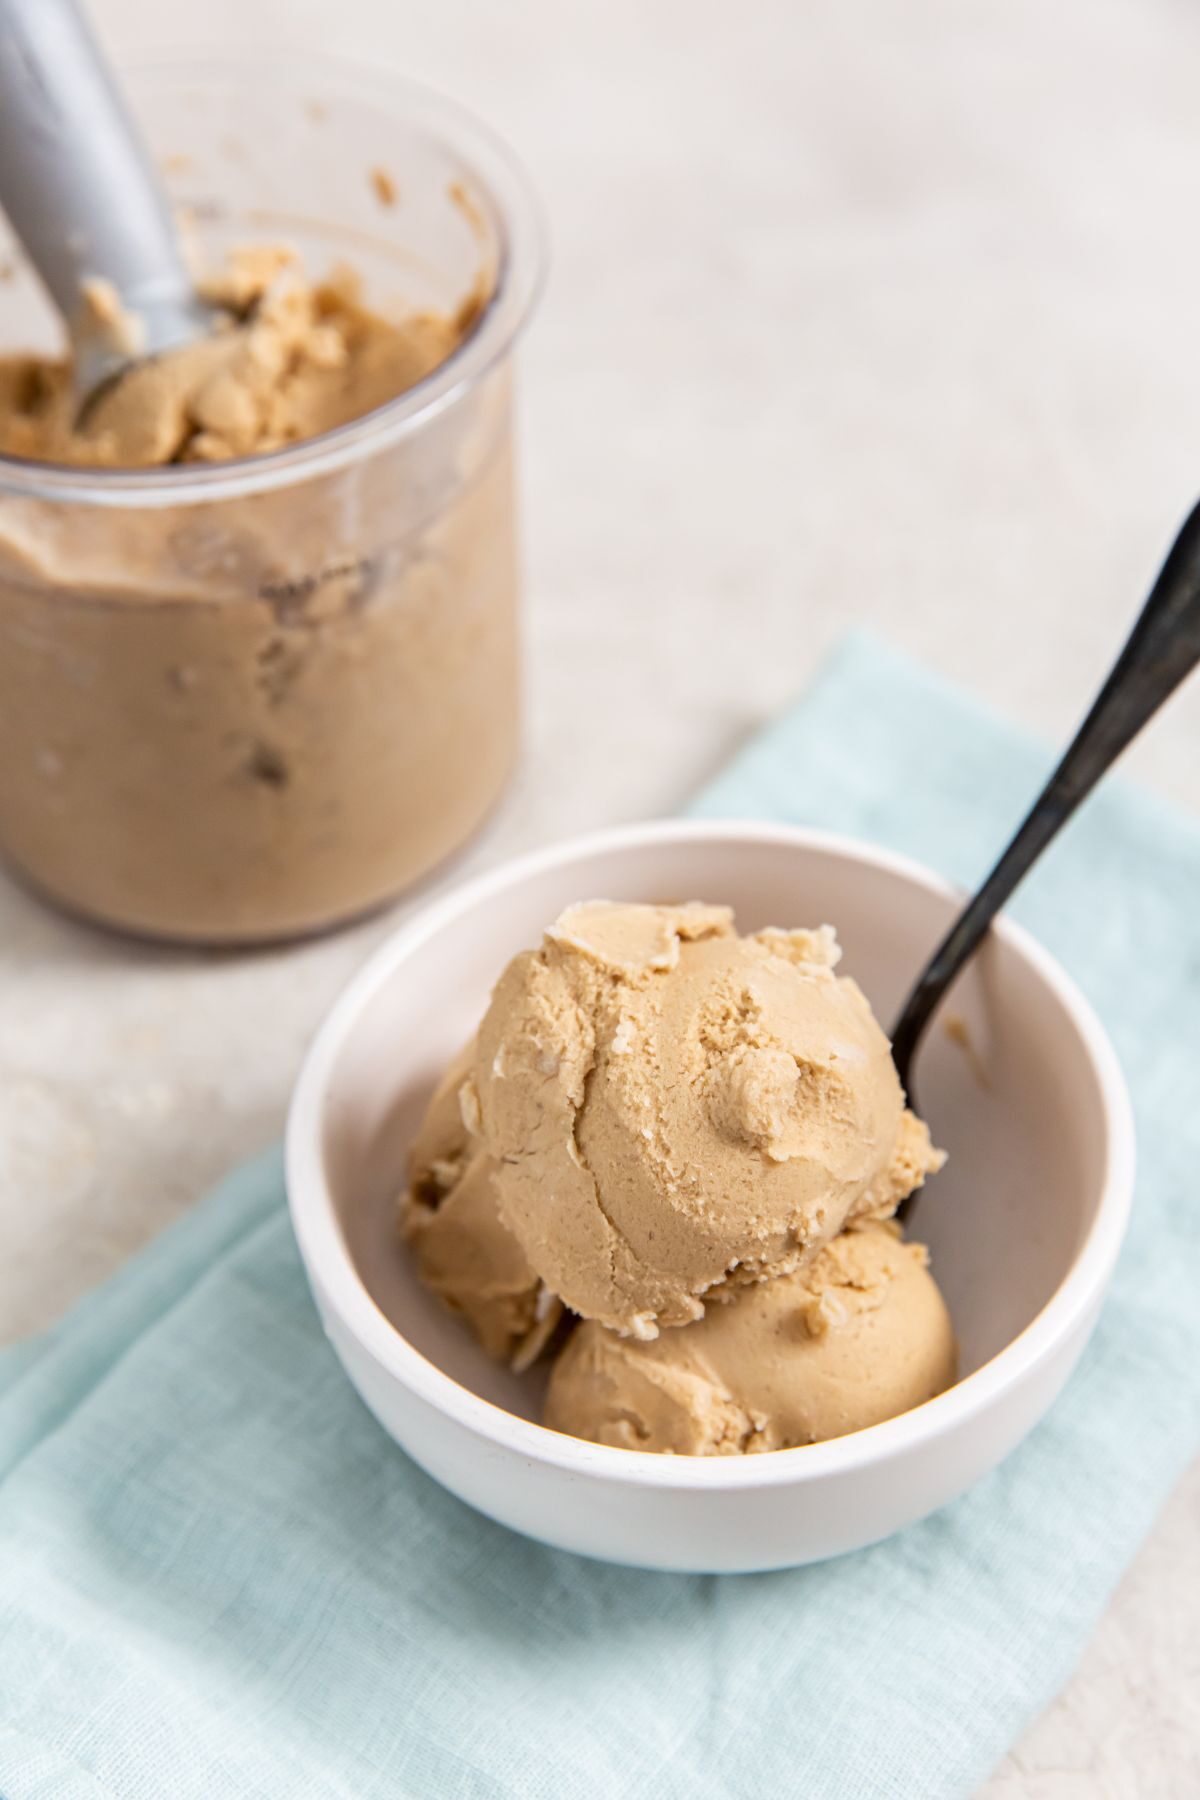 Coffee ice cream in a white bowl with a black spoon on a turquoise napkin